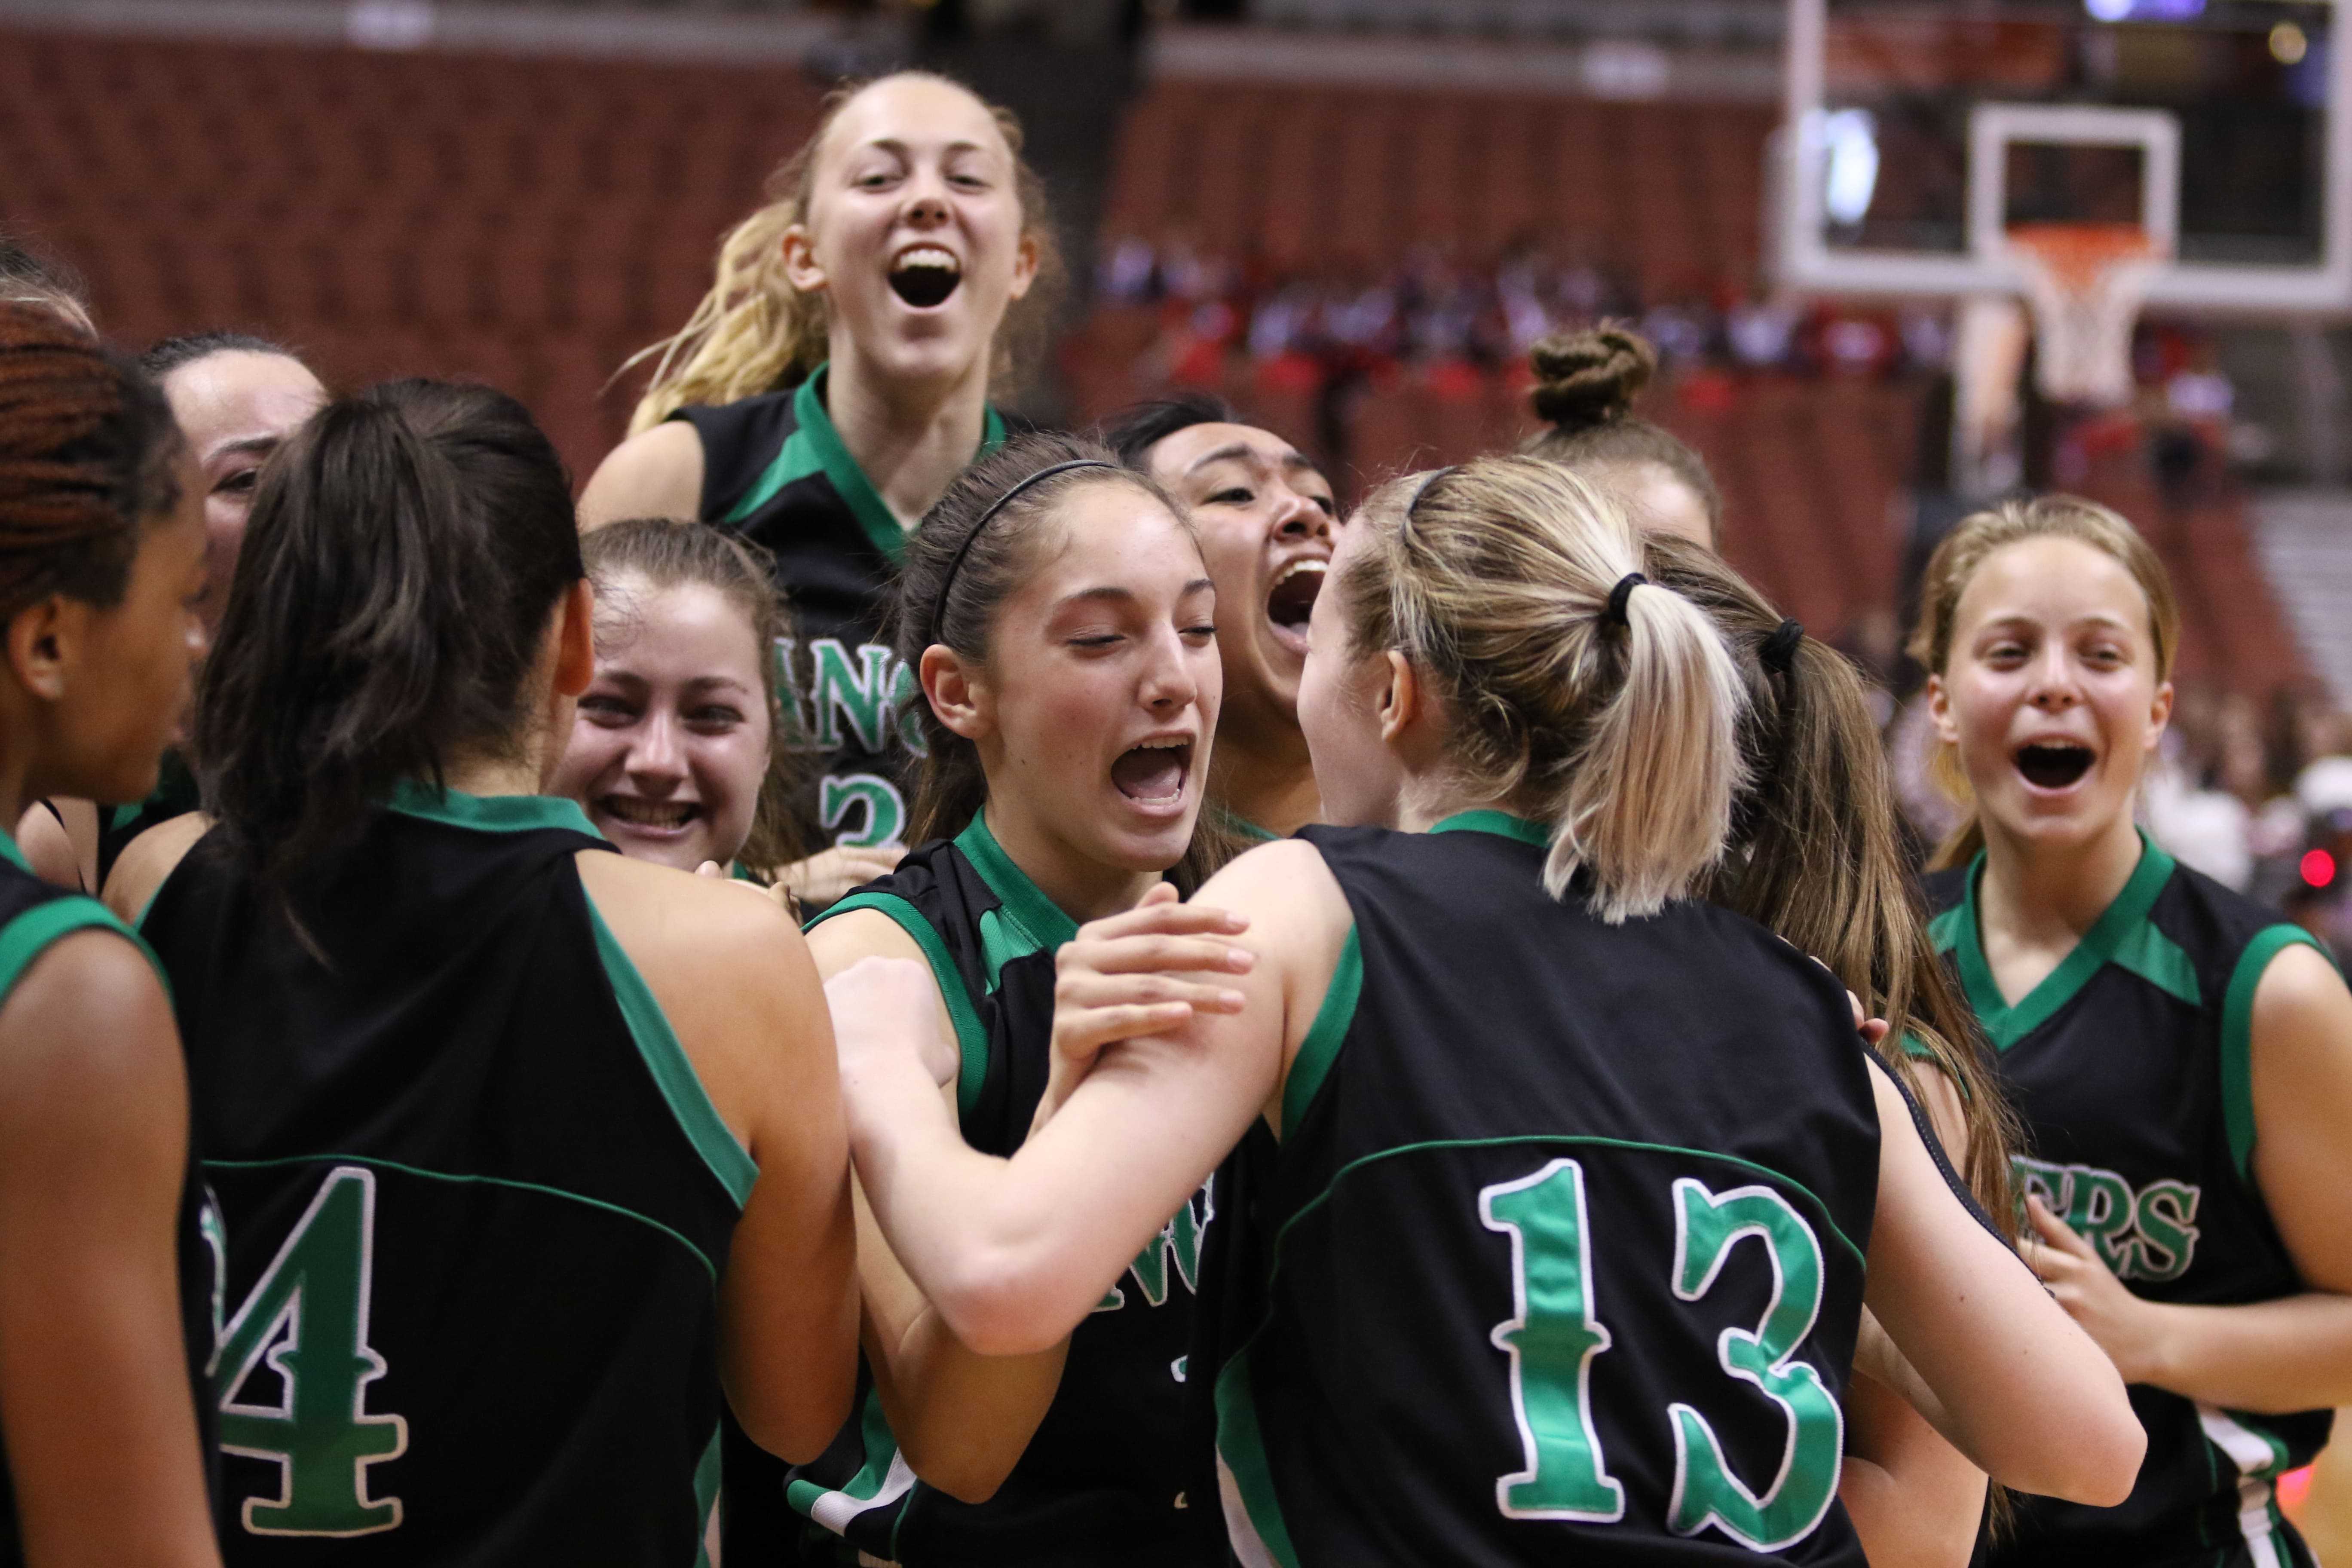 Is girls basketball scored differently from boys basketball?